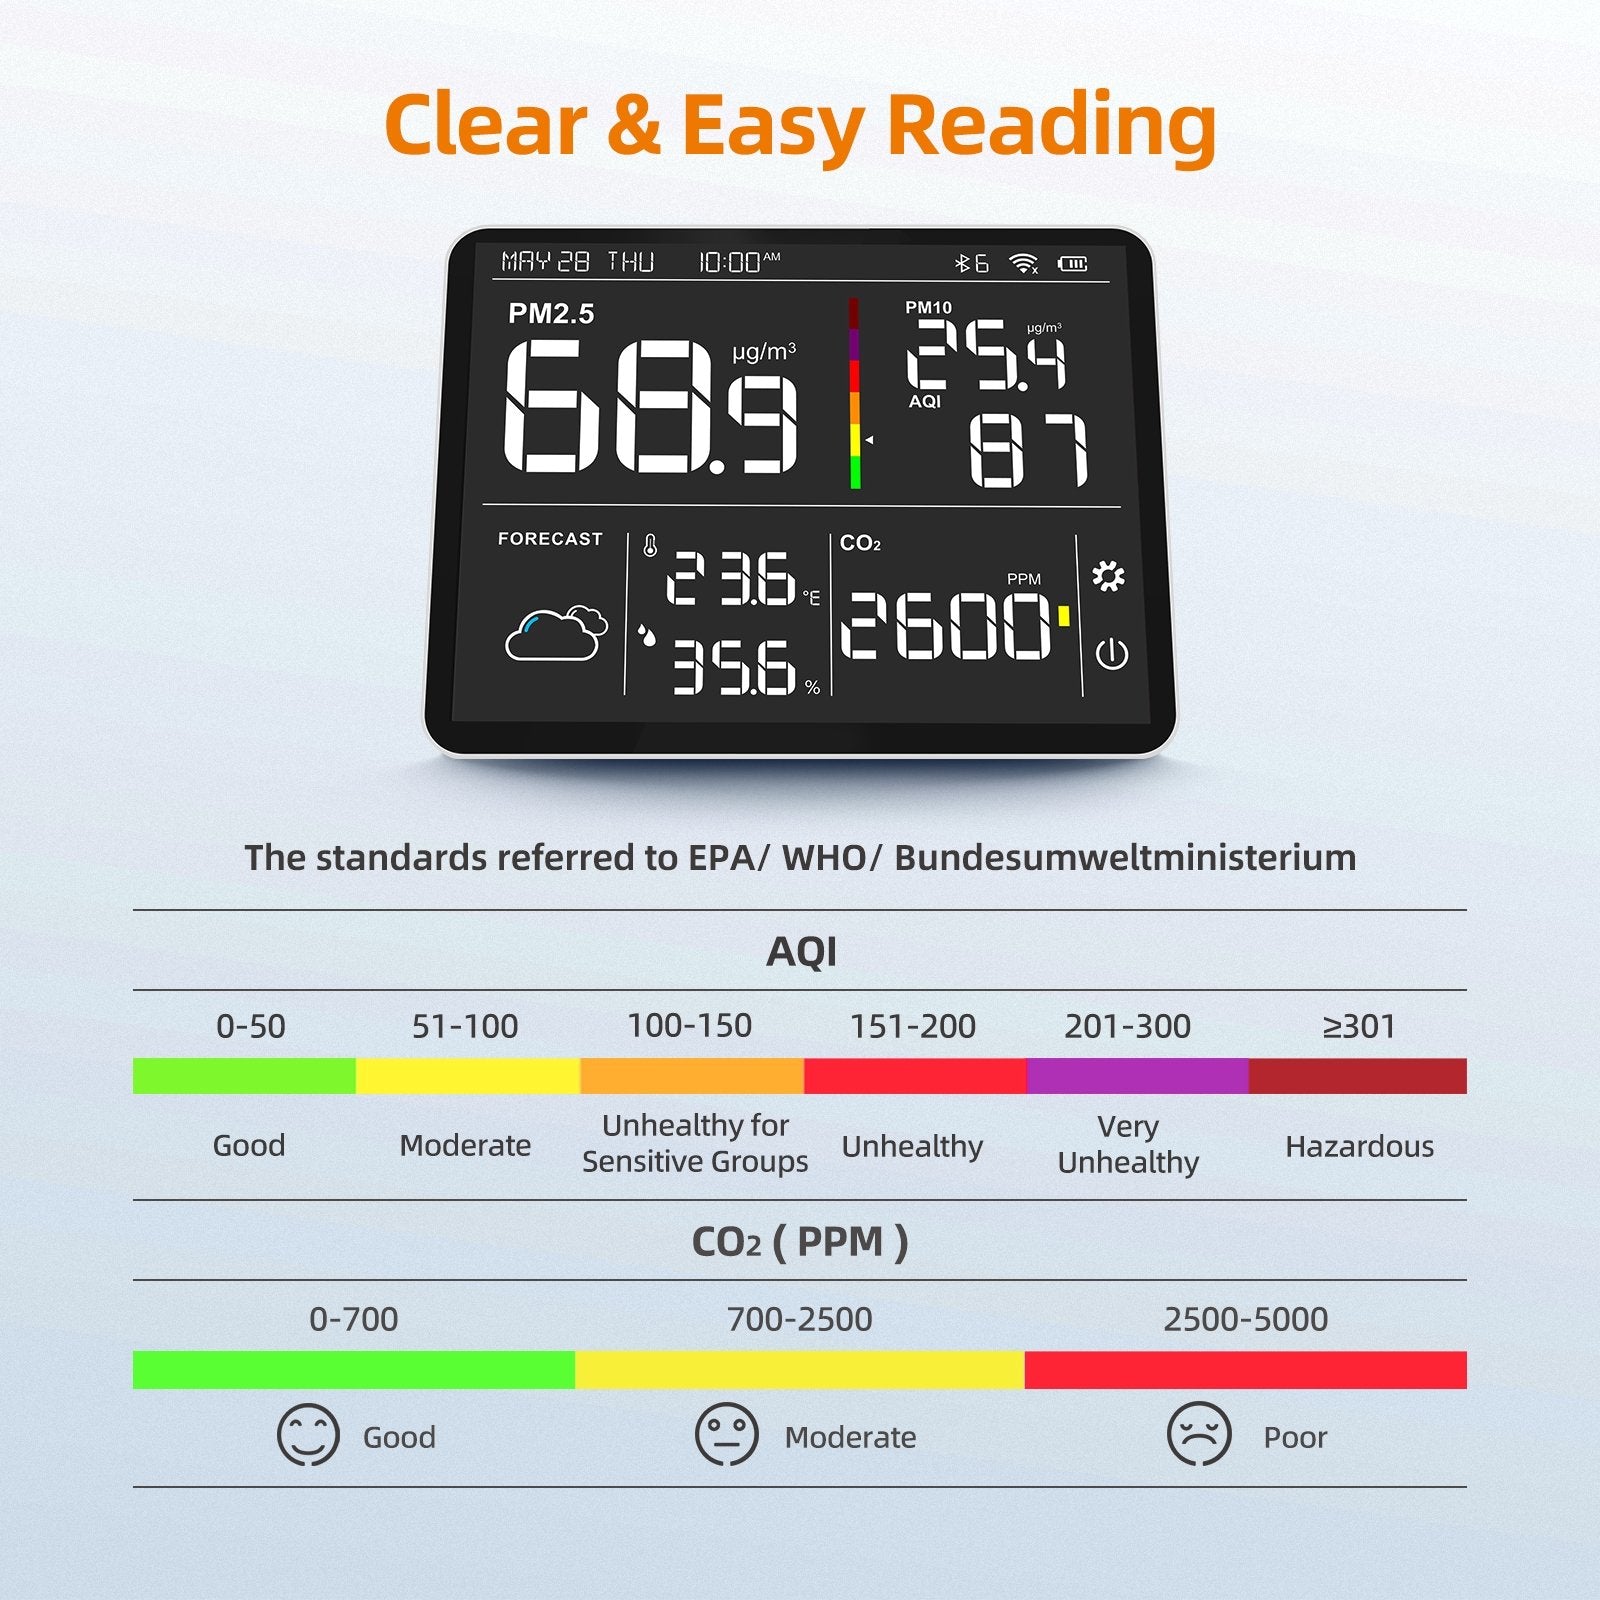 Temtop M100 8 in 1 Air Quality Monitor Detecting CO2 PM2.5 PM10 AQI - Temtop